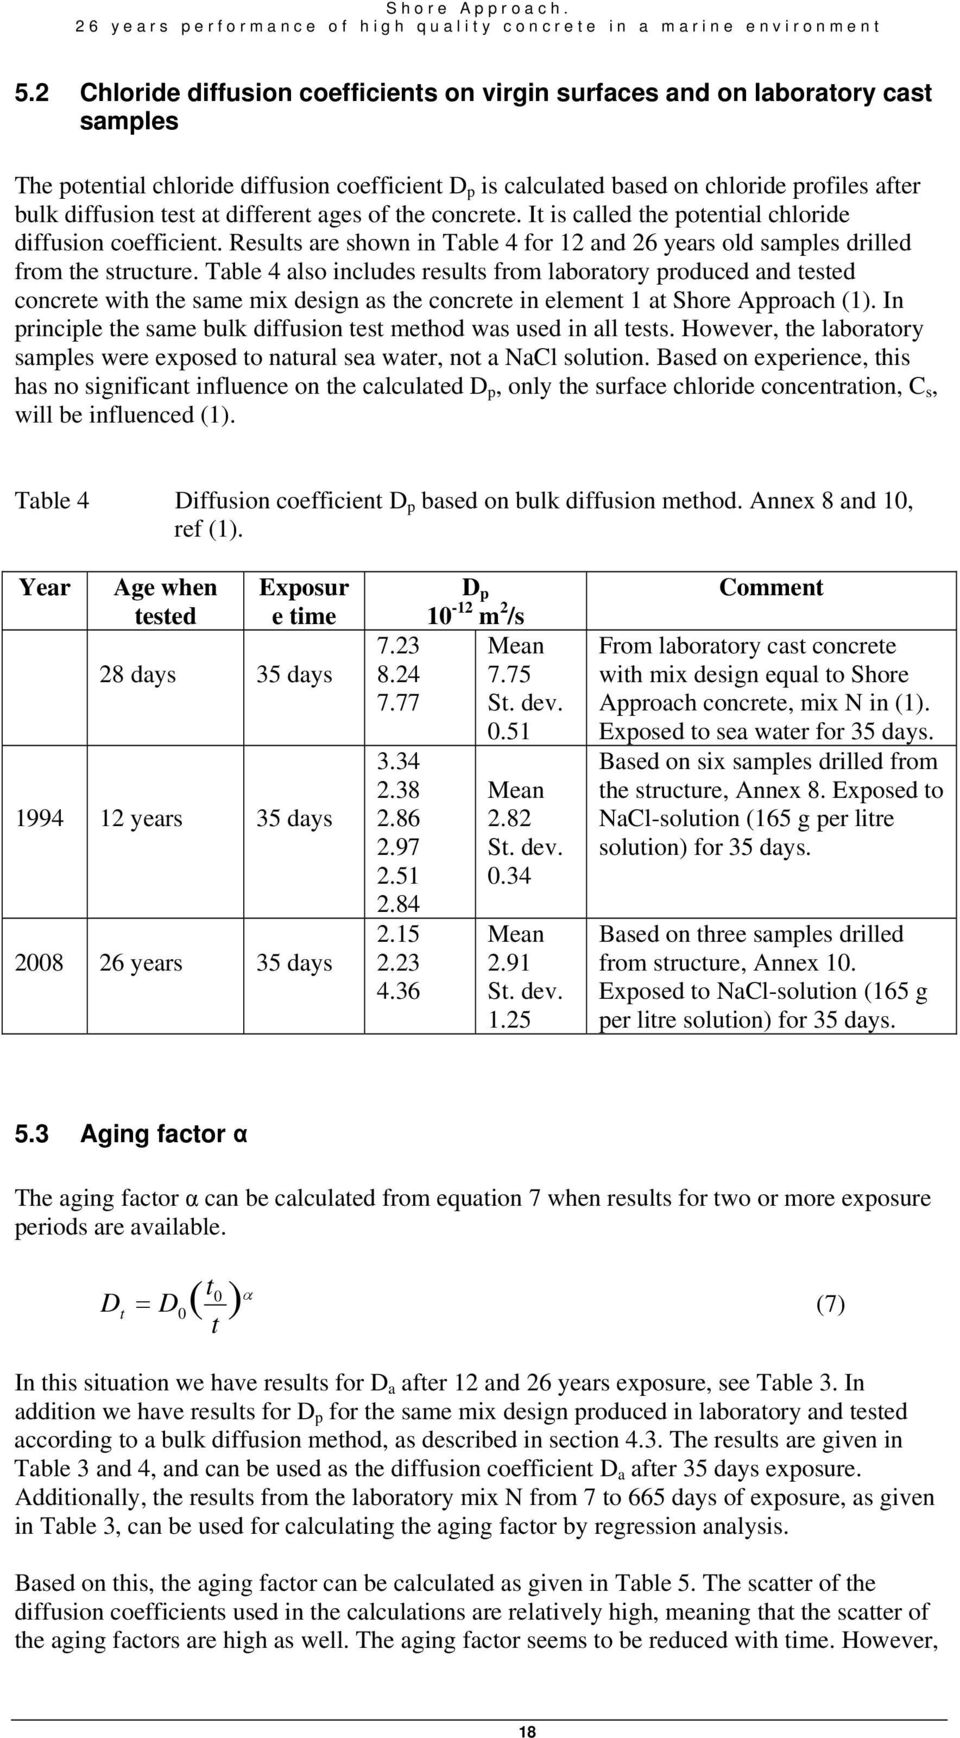 at different ages of the concrete. It is called the potential chloride diffusion coefficient. Results are shown in Table 4 for 12 and 26 years old samples drilled from the structure.